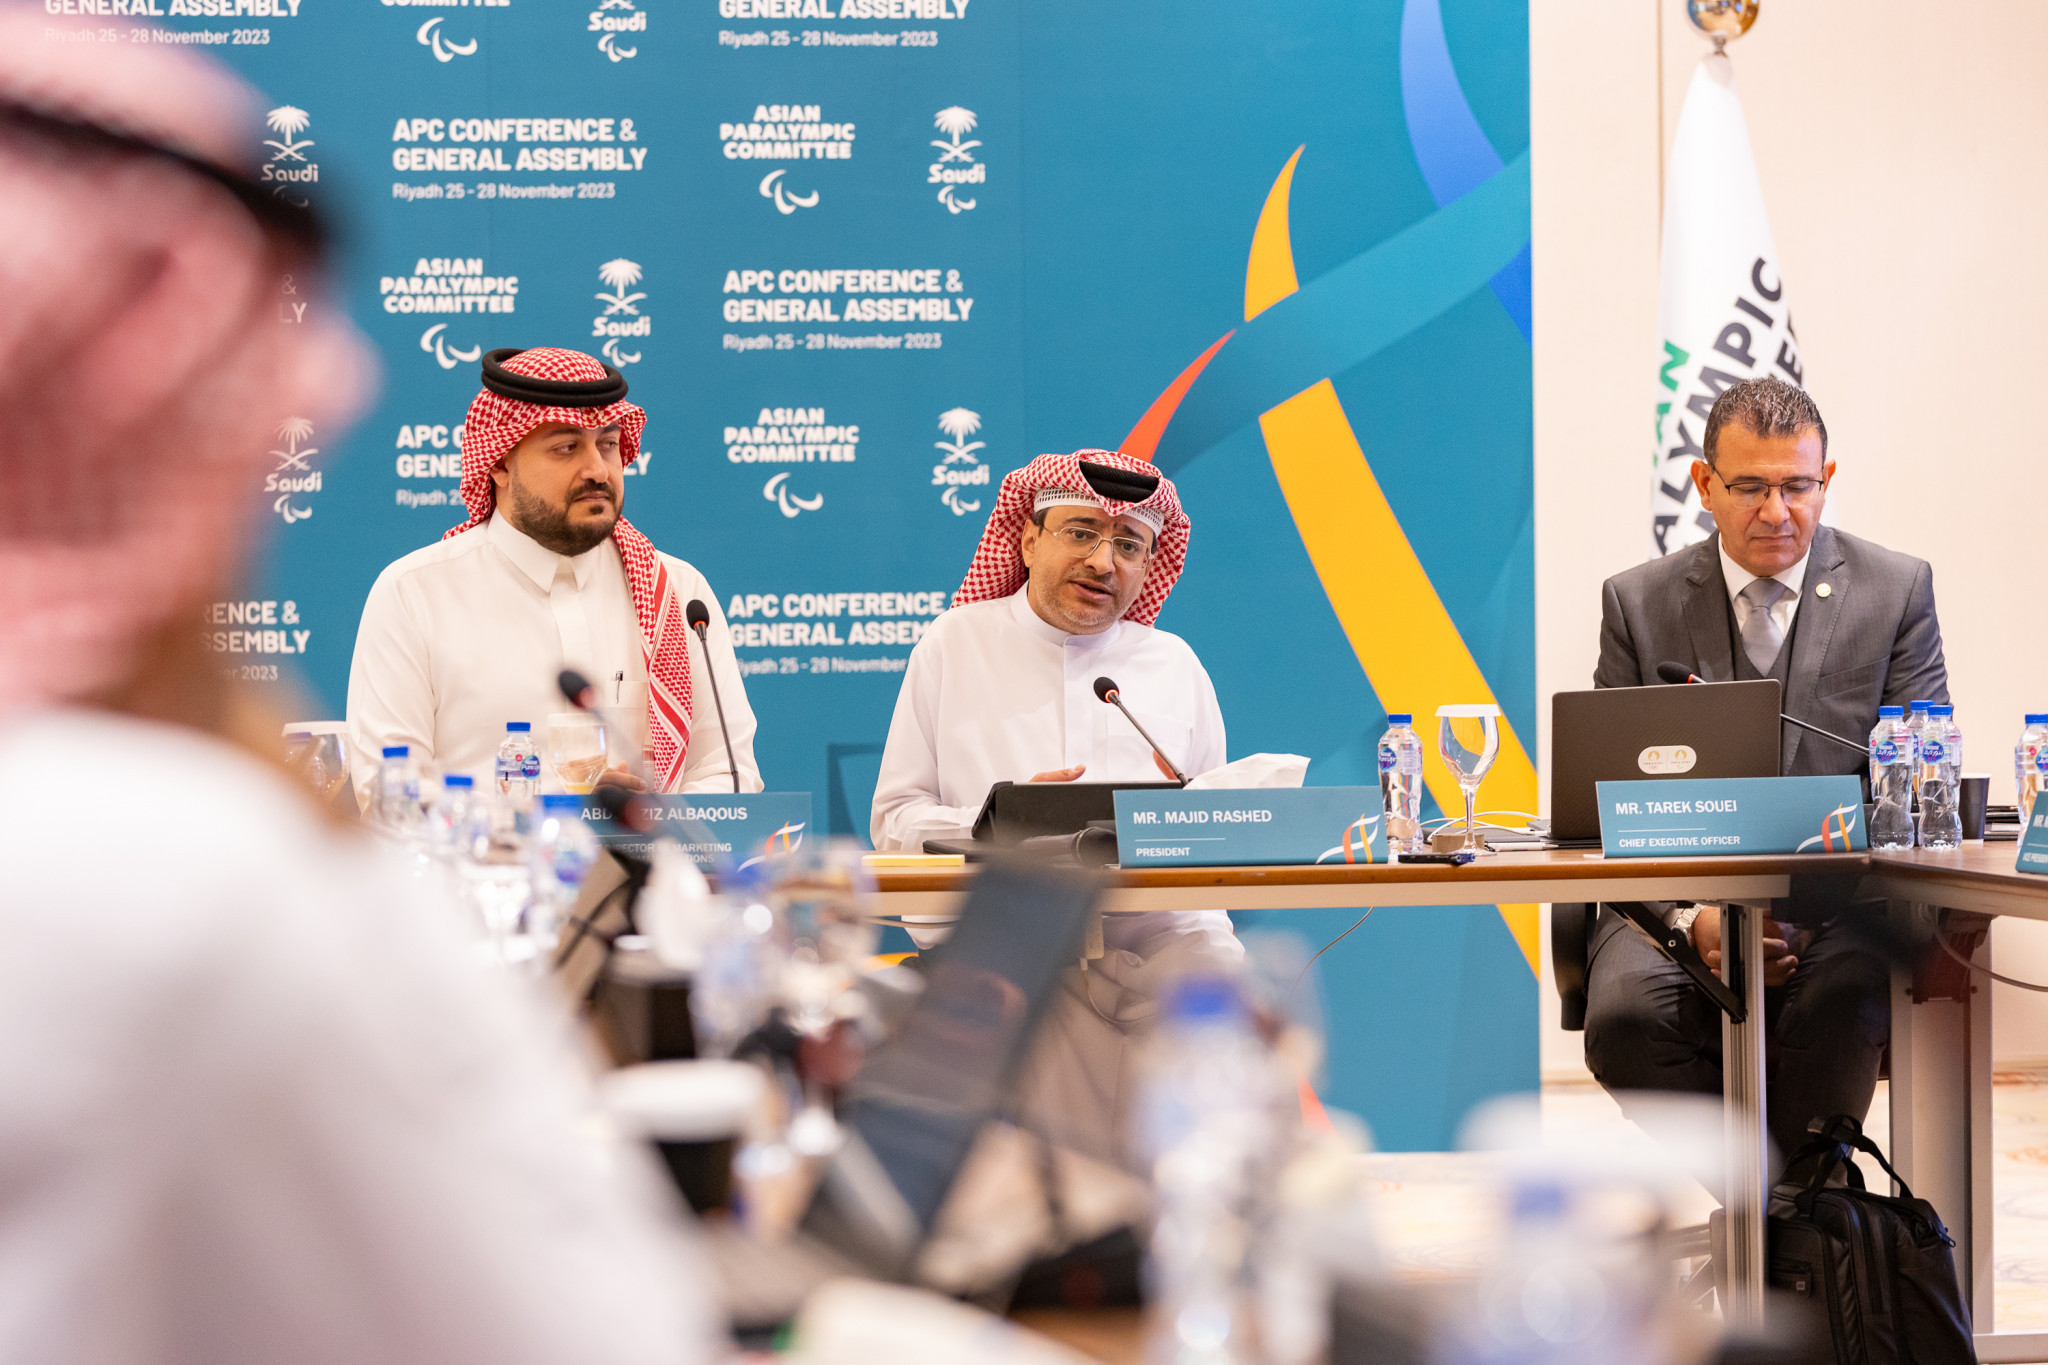 AsPC President, Majid Rashed - ASIAN PARALYMPIC COMMITTEE